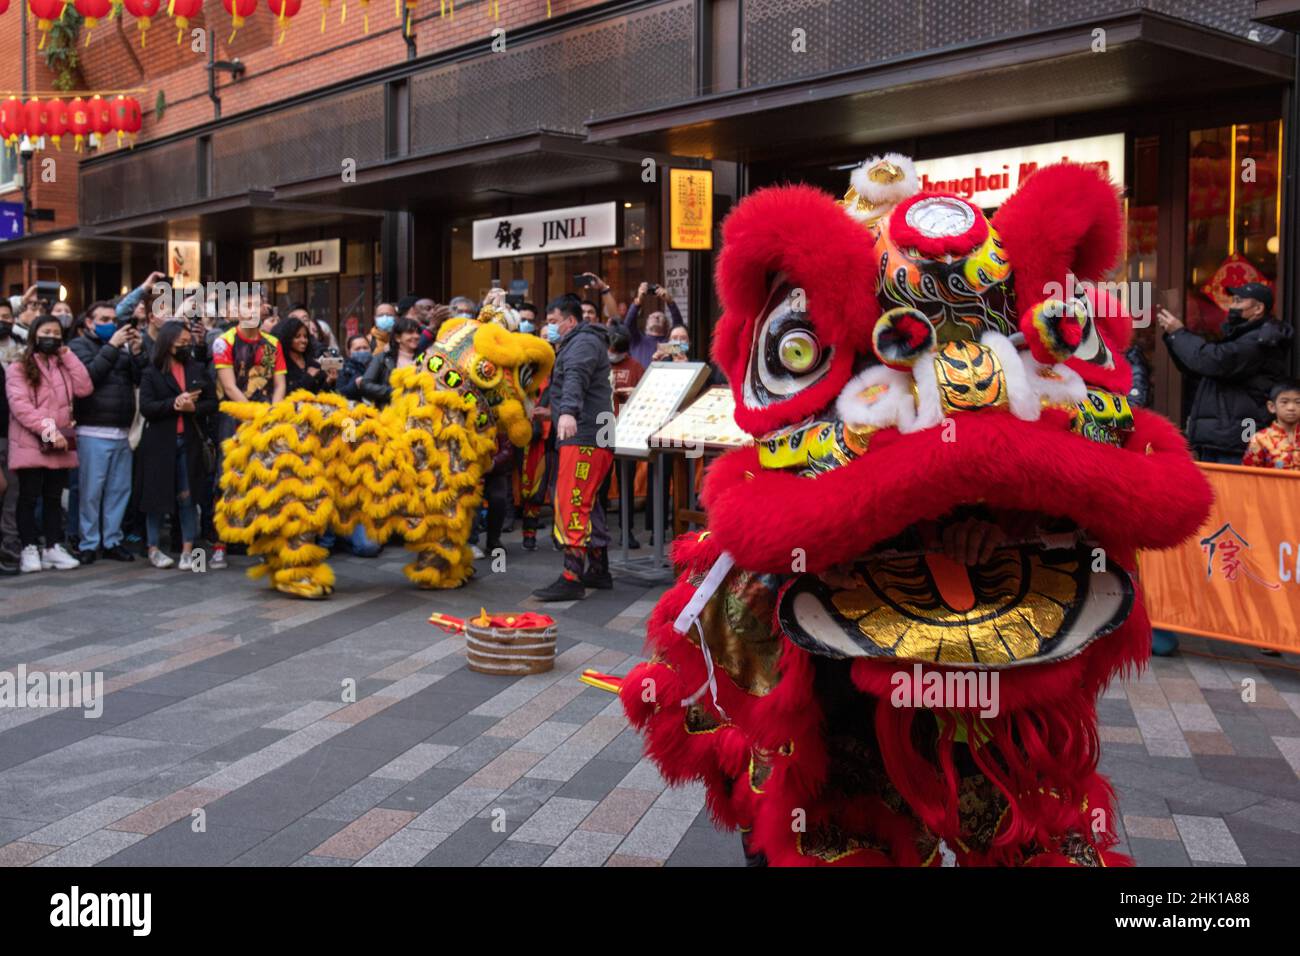 London, England, UK 1 February 2022 Crowds gather in China Town to celebrate Chinese New Year, this year visited by Camilla, Duchess of Cornwall and Prince Charles. Chinese dragons and drummers entertain the crowds Stock Photo